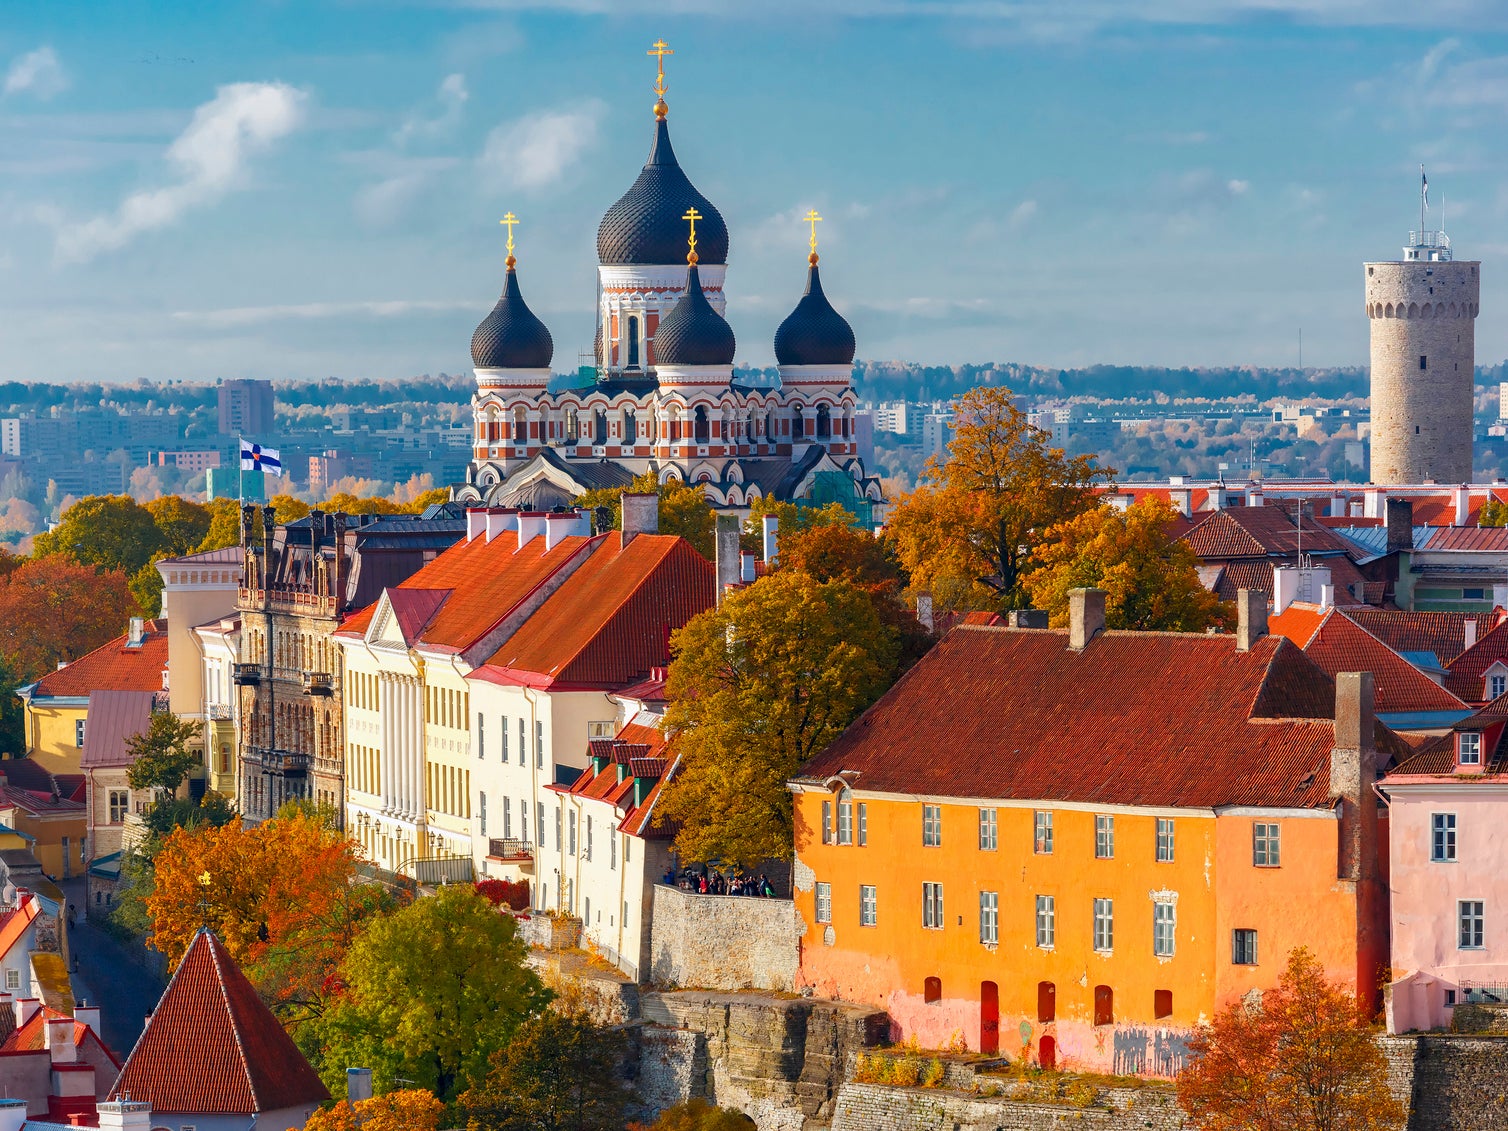 Tallinn, Estonia. You don't have to move to the country to base your business there